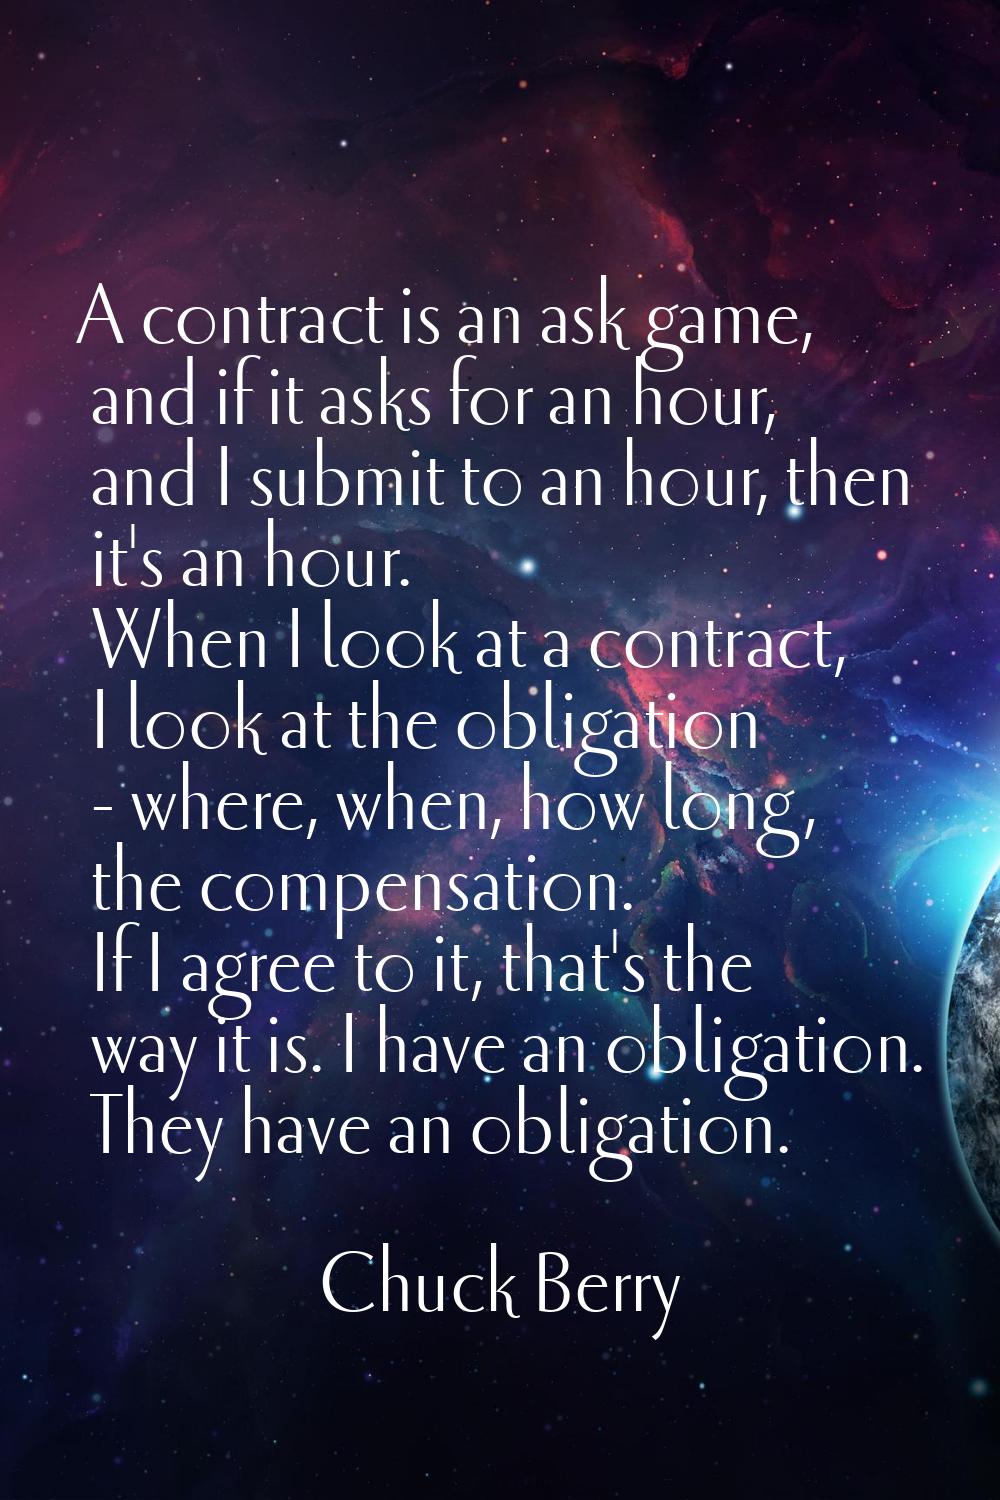 A contract is an ask game, and if it asks for an hour, and I submit to an hour, then it's an hour. 